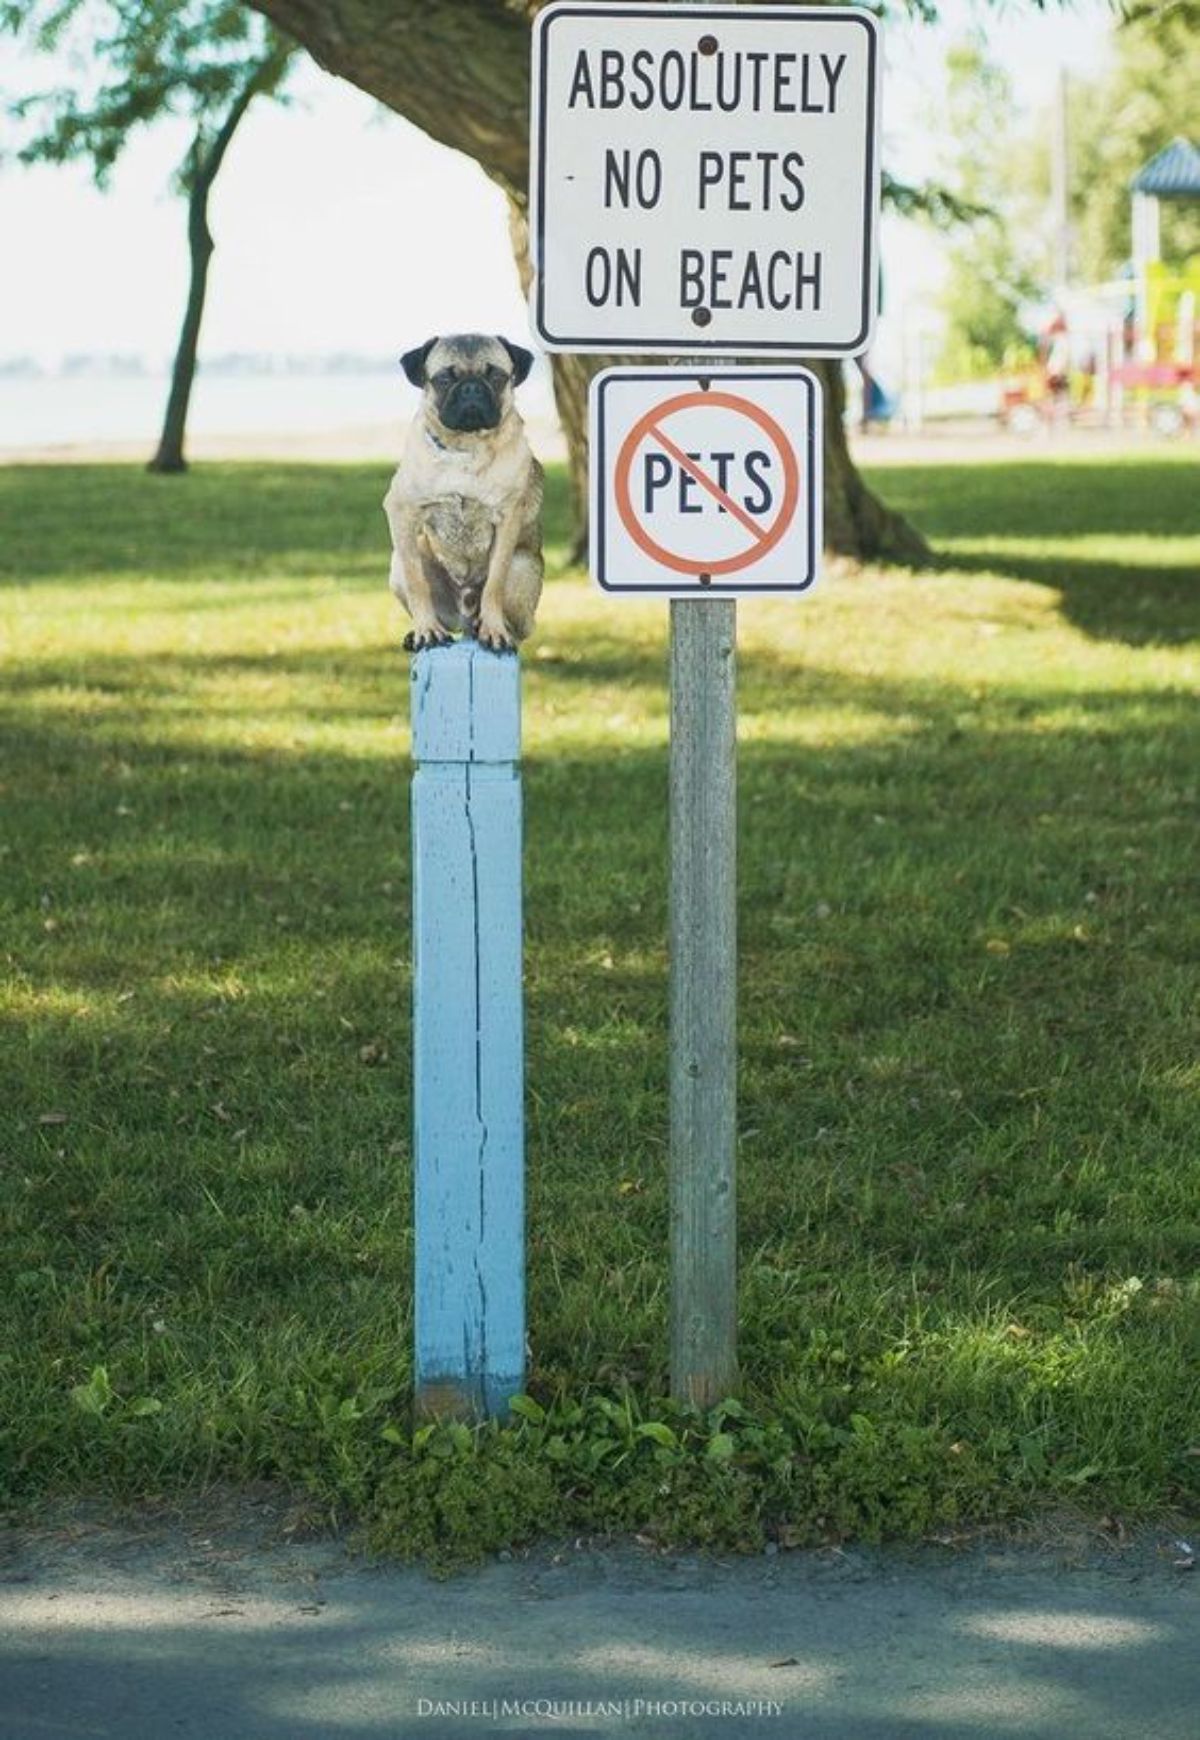 brown pug sitting on a white pole next to a no pets sign and an ABSOLUTELY NO PETS ON THE BEACH sign